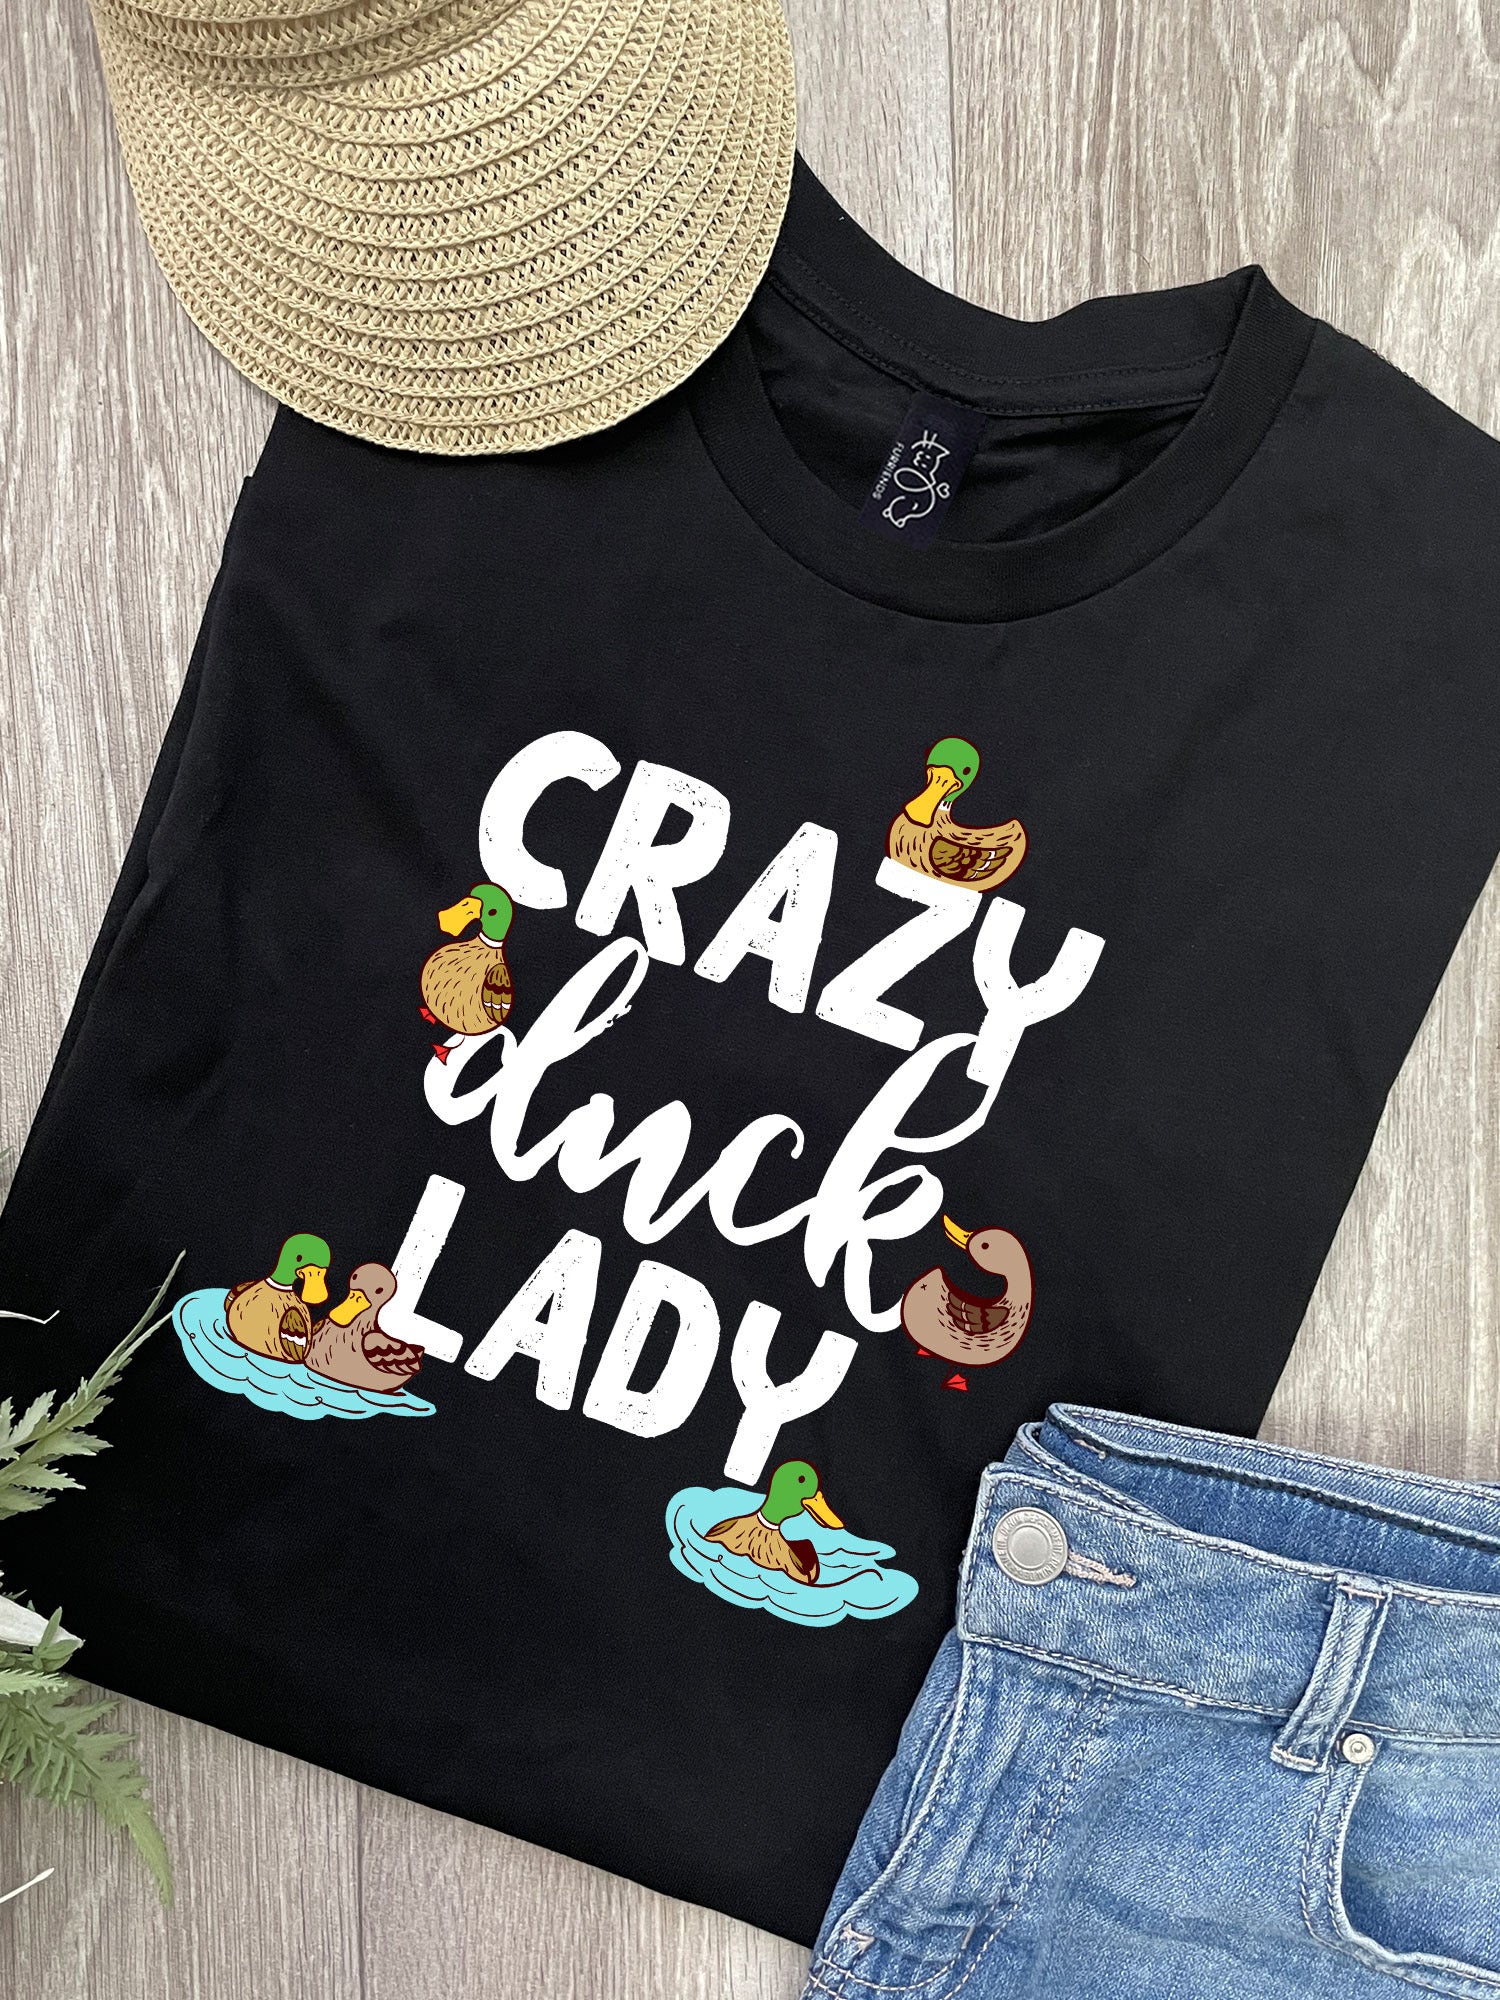 Crazy Duck Lady